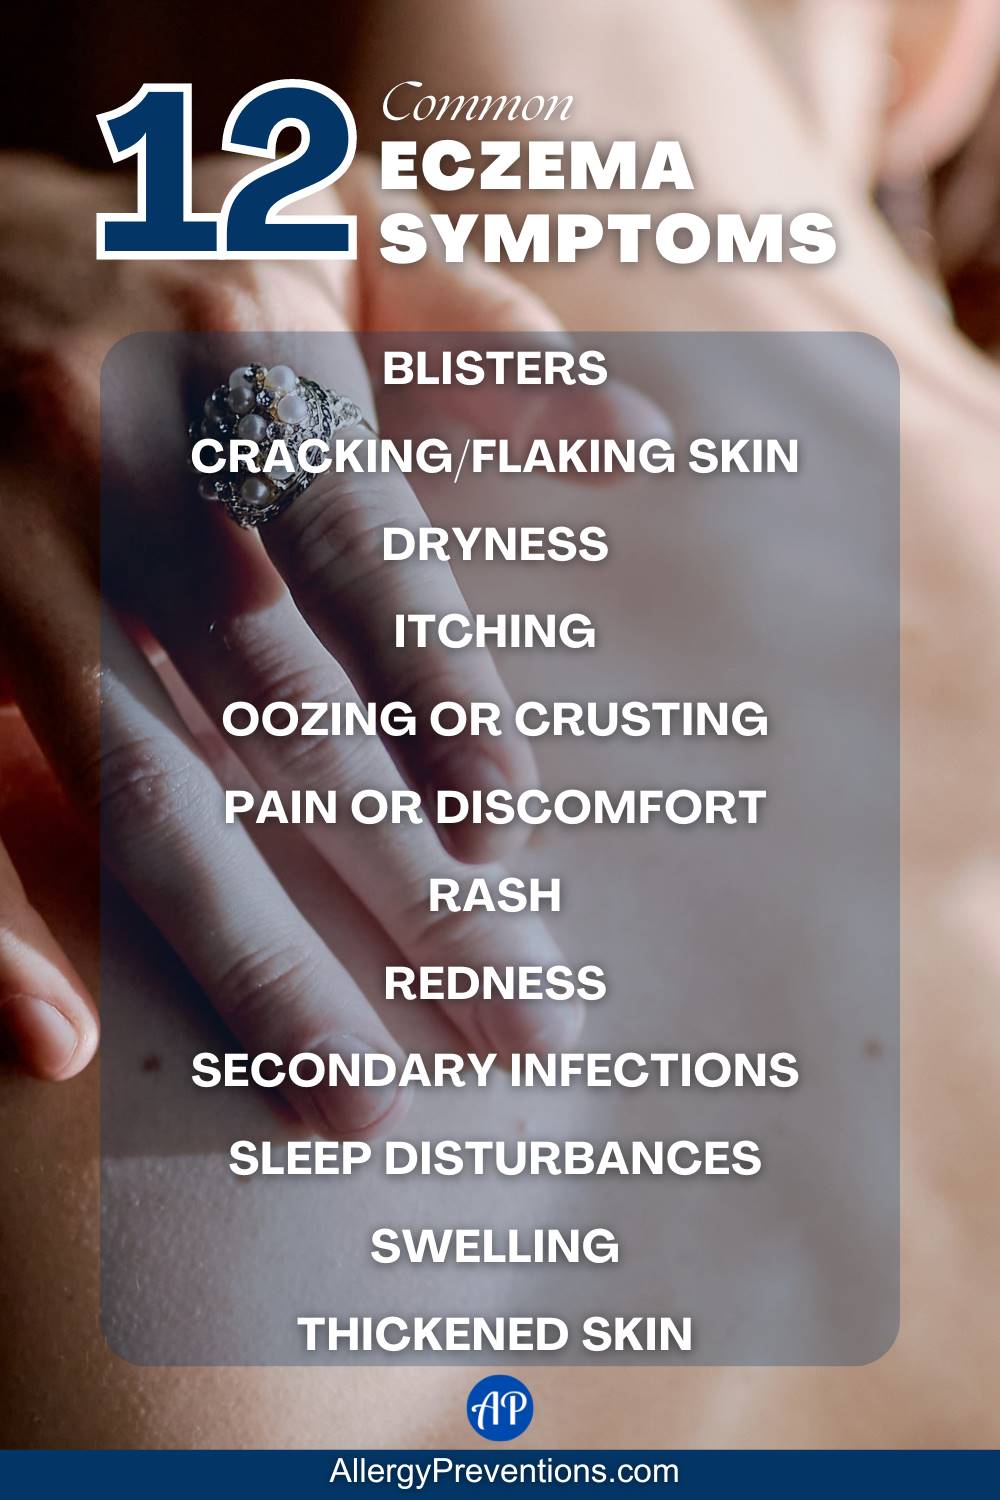 common eczema symptoms infographic. Here is a list of the 12 most common symptoms you may experience with eczema: Blisters Cracking/flaking skin, dryness, itching, oozing or crusting, pain or discomfort, rash, redness, secondary infections, sleep disturbances, swelling, and thickened skin.